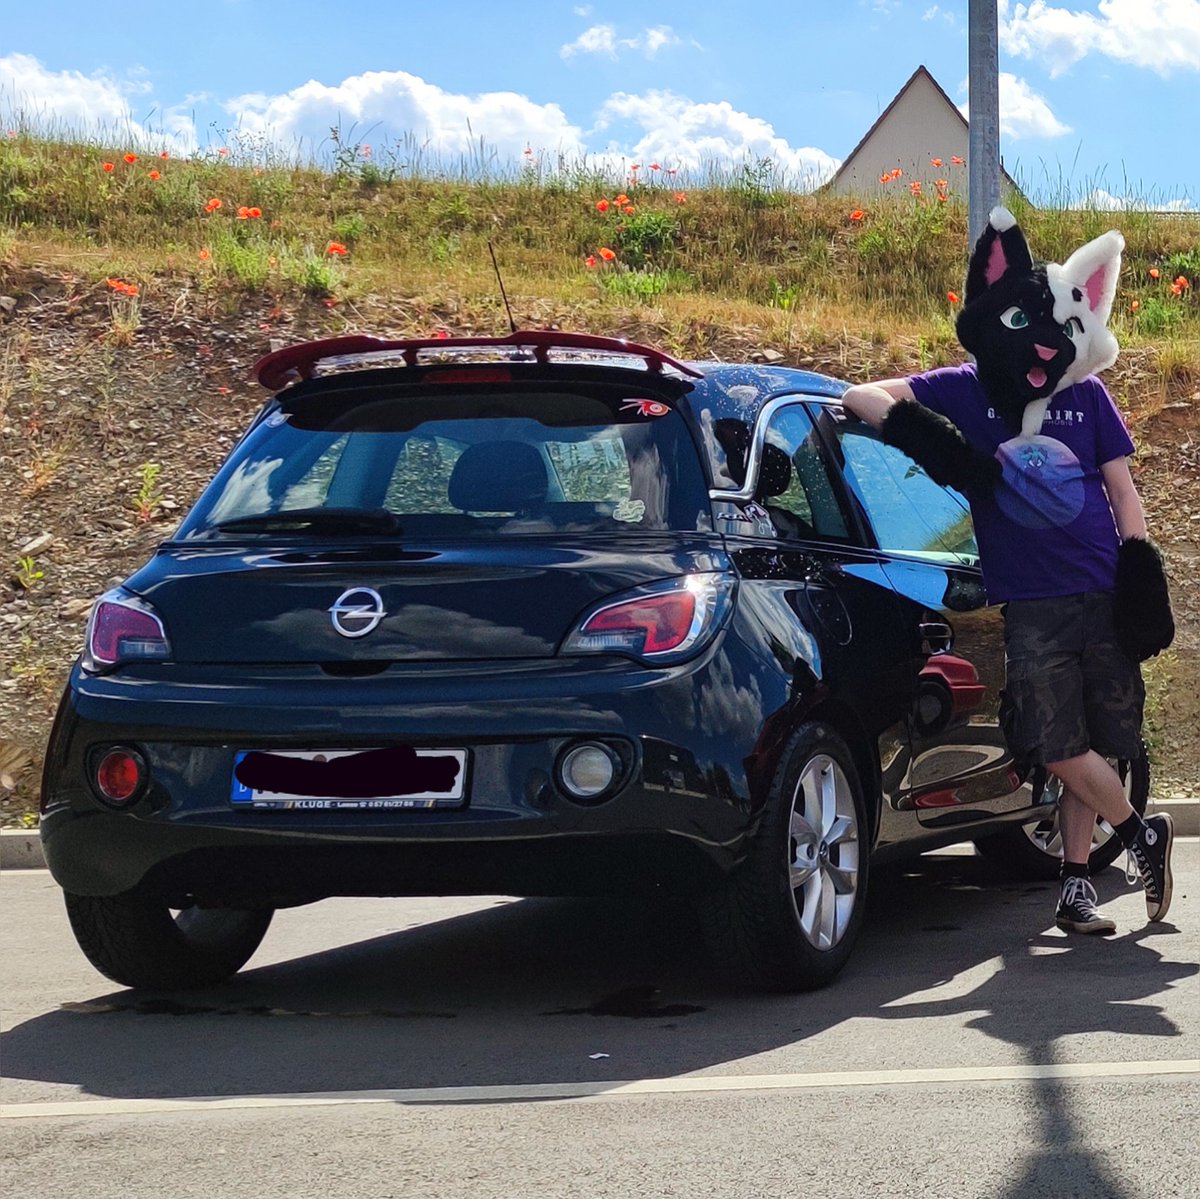 Got some new mods planned to make it more of a Rallye car 👀

#FursuitFriday #fursuit #furry #furries #cat #tabaxi #opel #opeladam #carfur